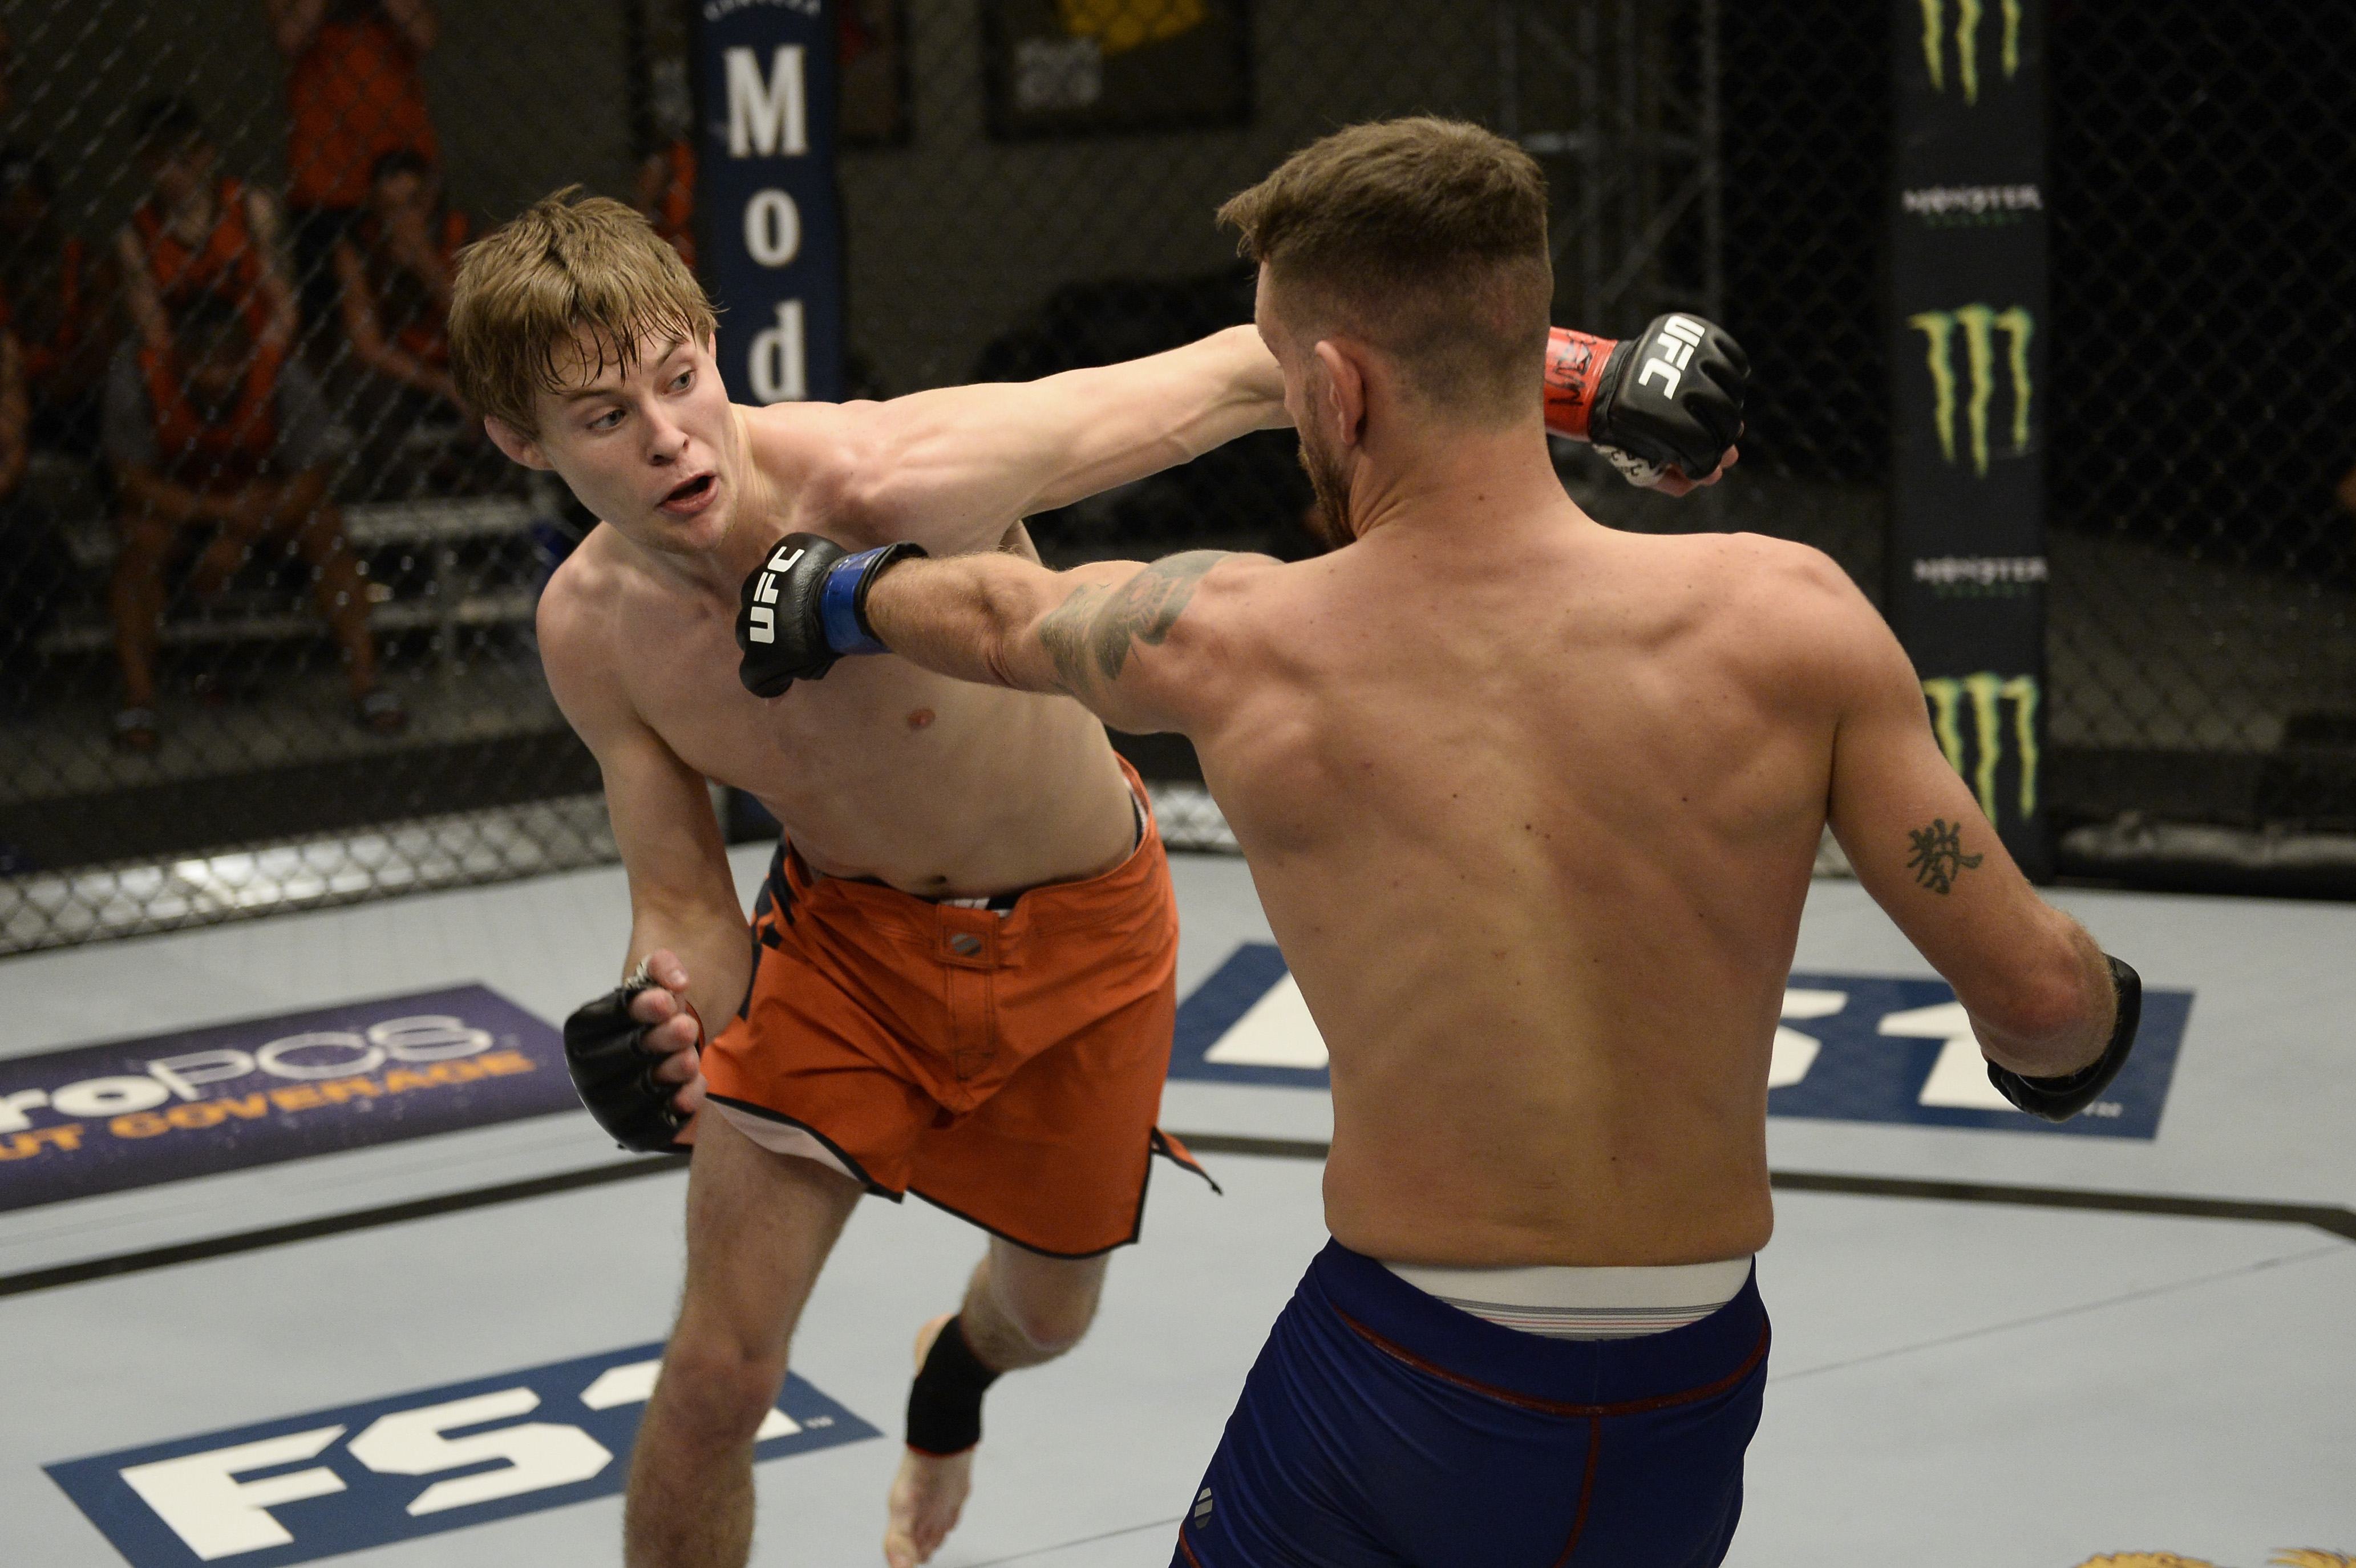 Bryce Mitchell (L) punches Jay Cucciniello during the filming of The Ultimate Fighter: Undefeated (Photo by Brandon Magnus/Zuffa LLC)